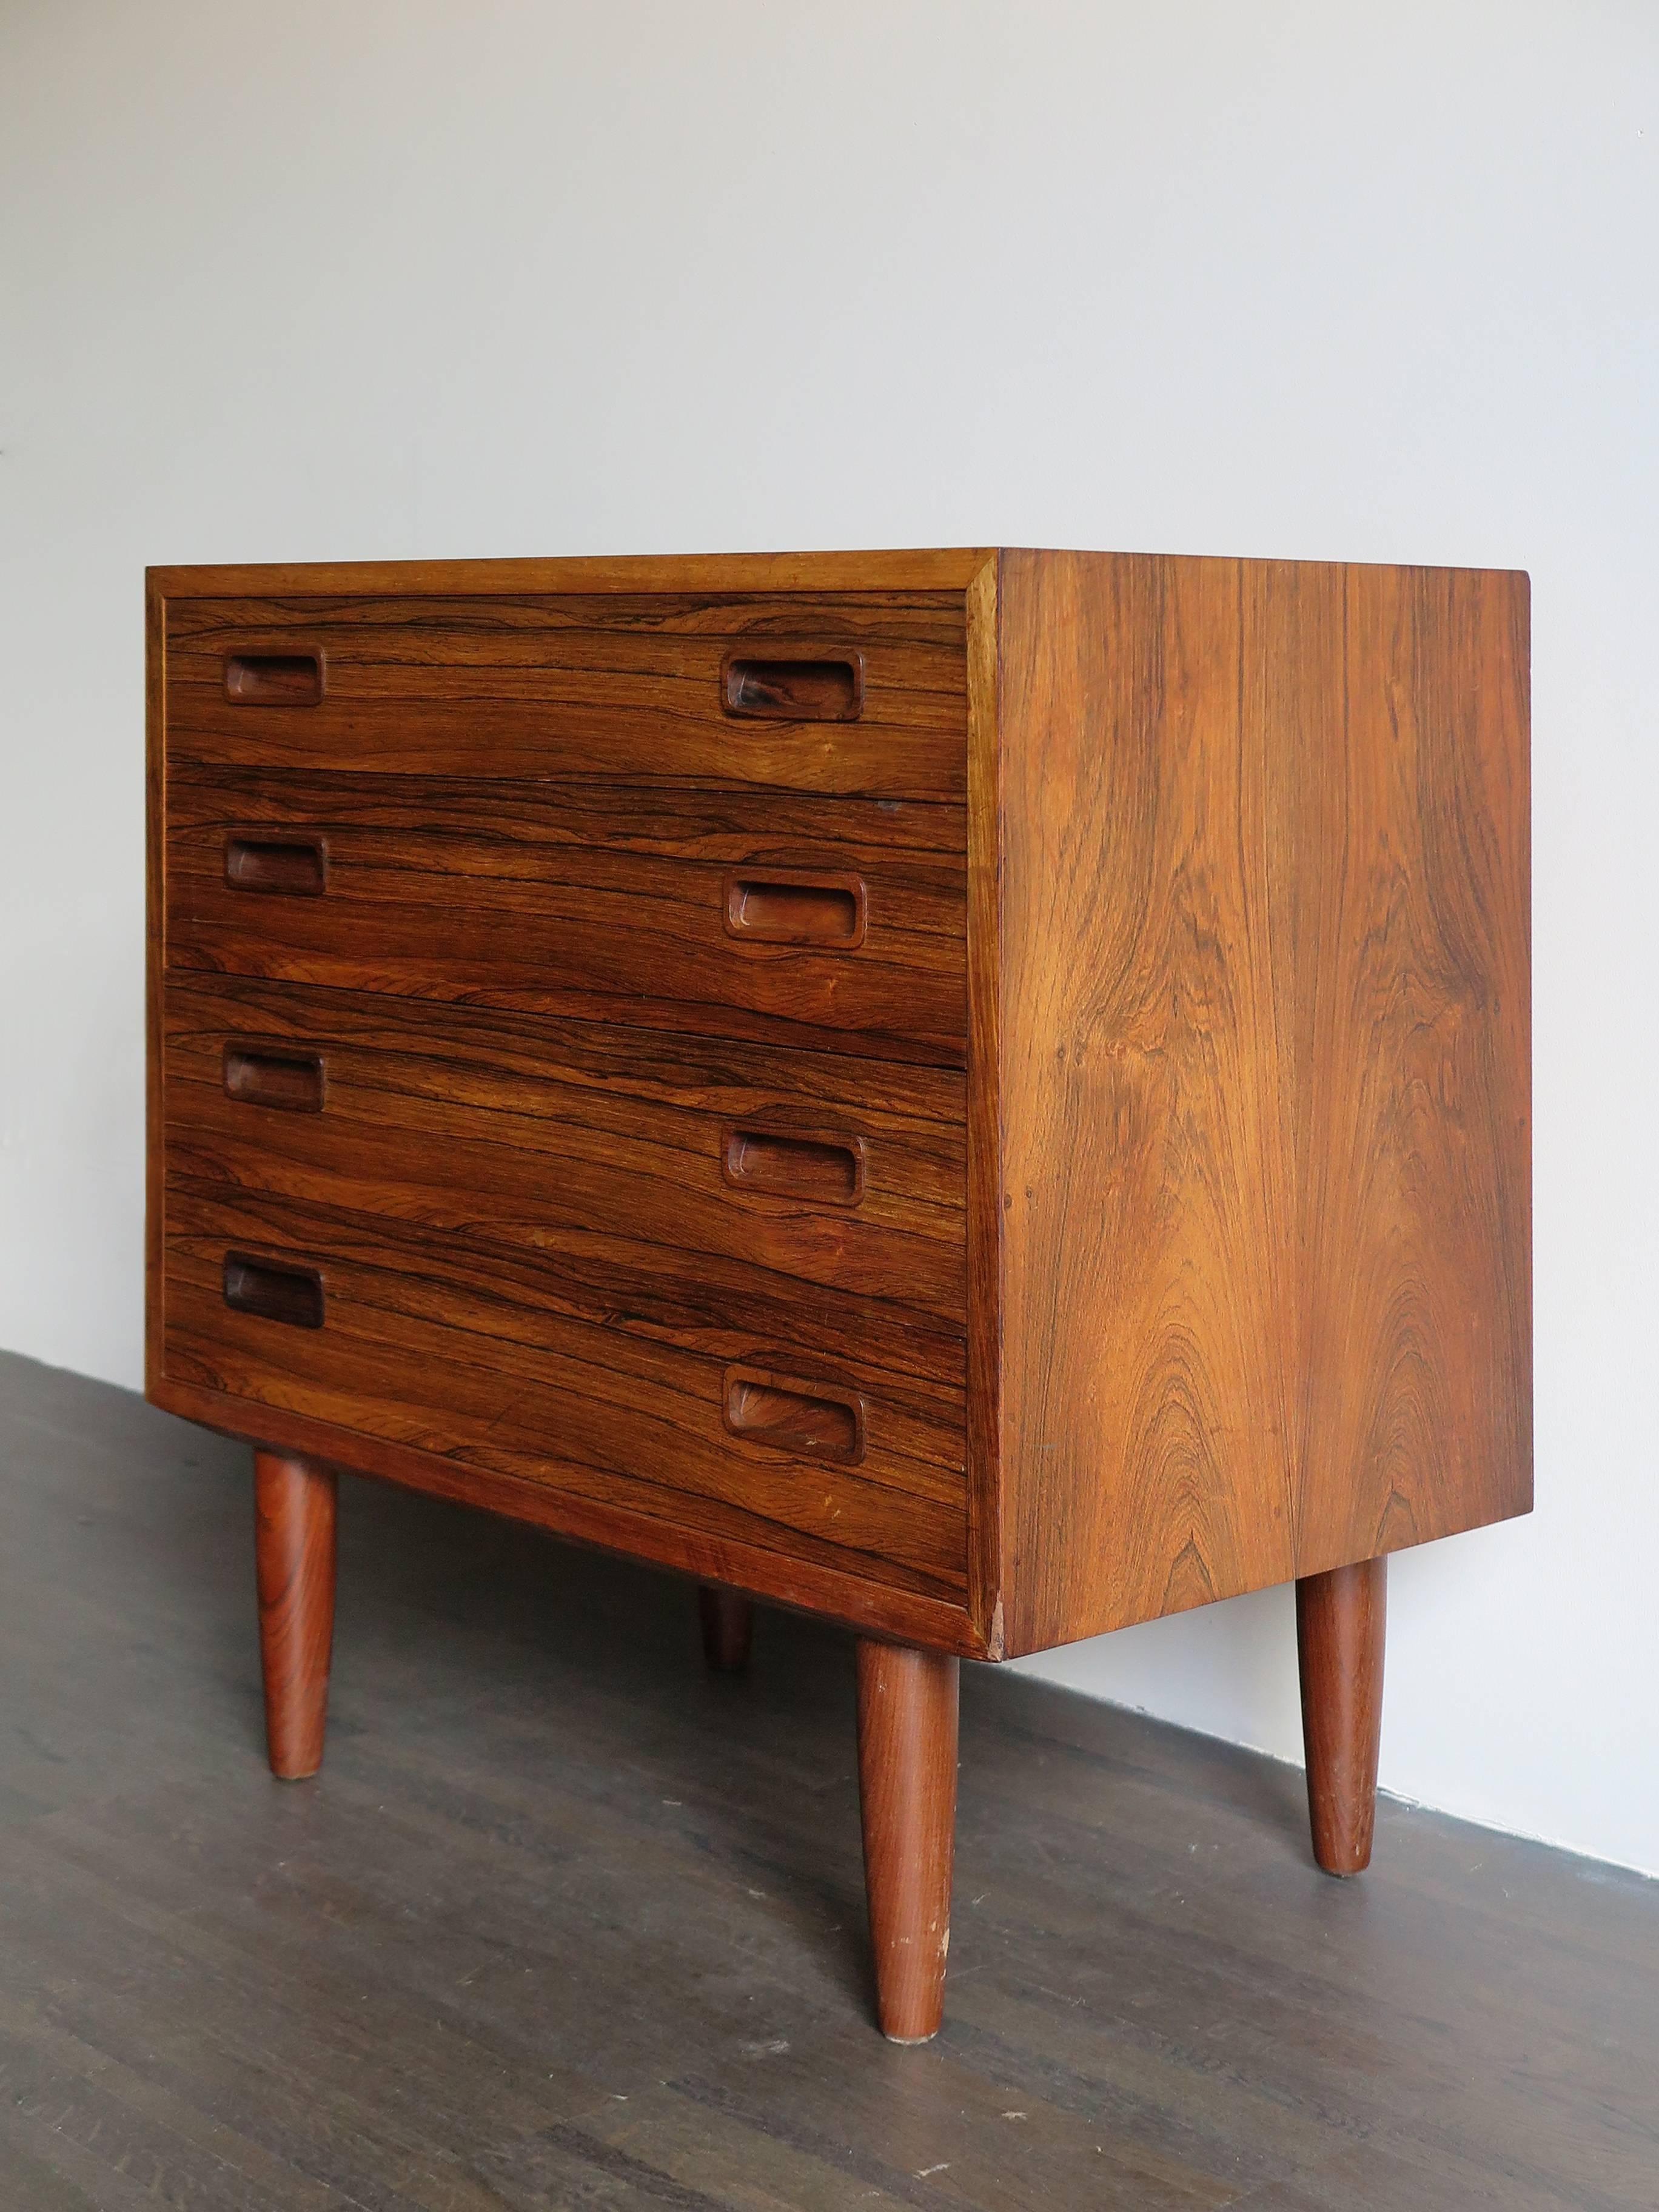 Little Danish Scandinavian Modern rosewood chest of drawers with four drawers with turned wood handles, midcentury design, circa 1960.